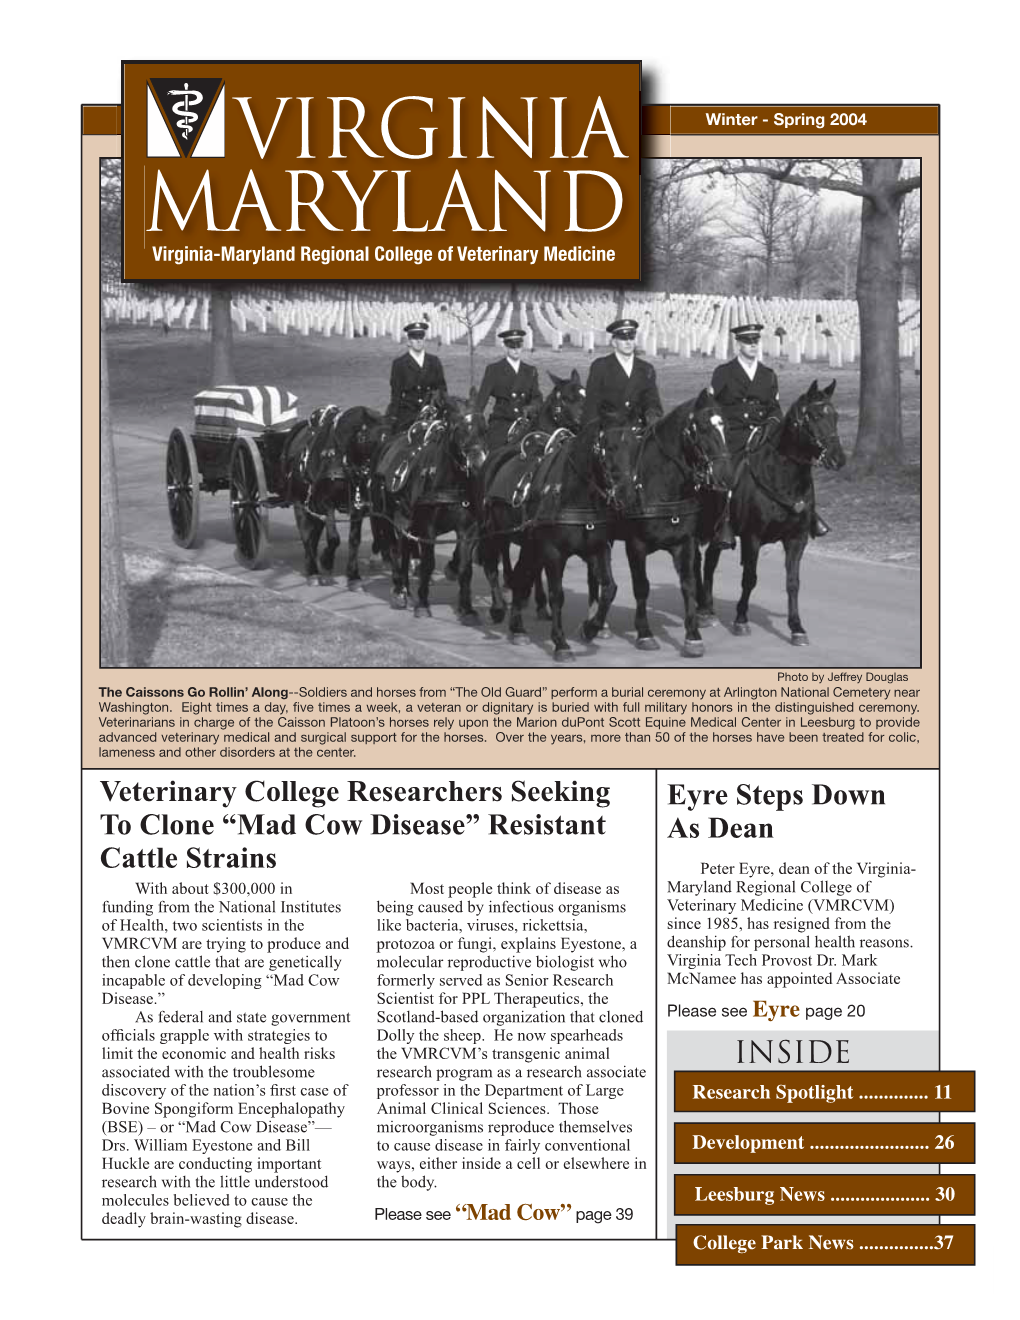 Virginia Maryland Is Published Periodi- Cally by the Virginia-Maryland Regional College of Veterinary Medicine